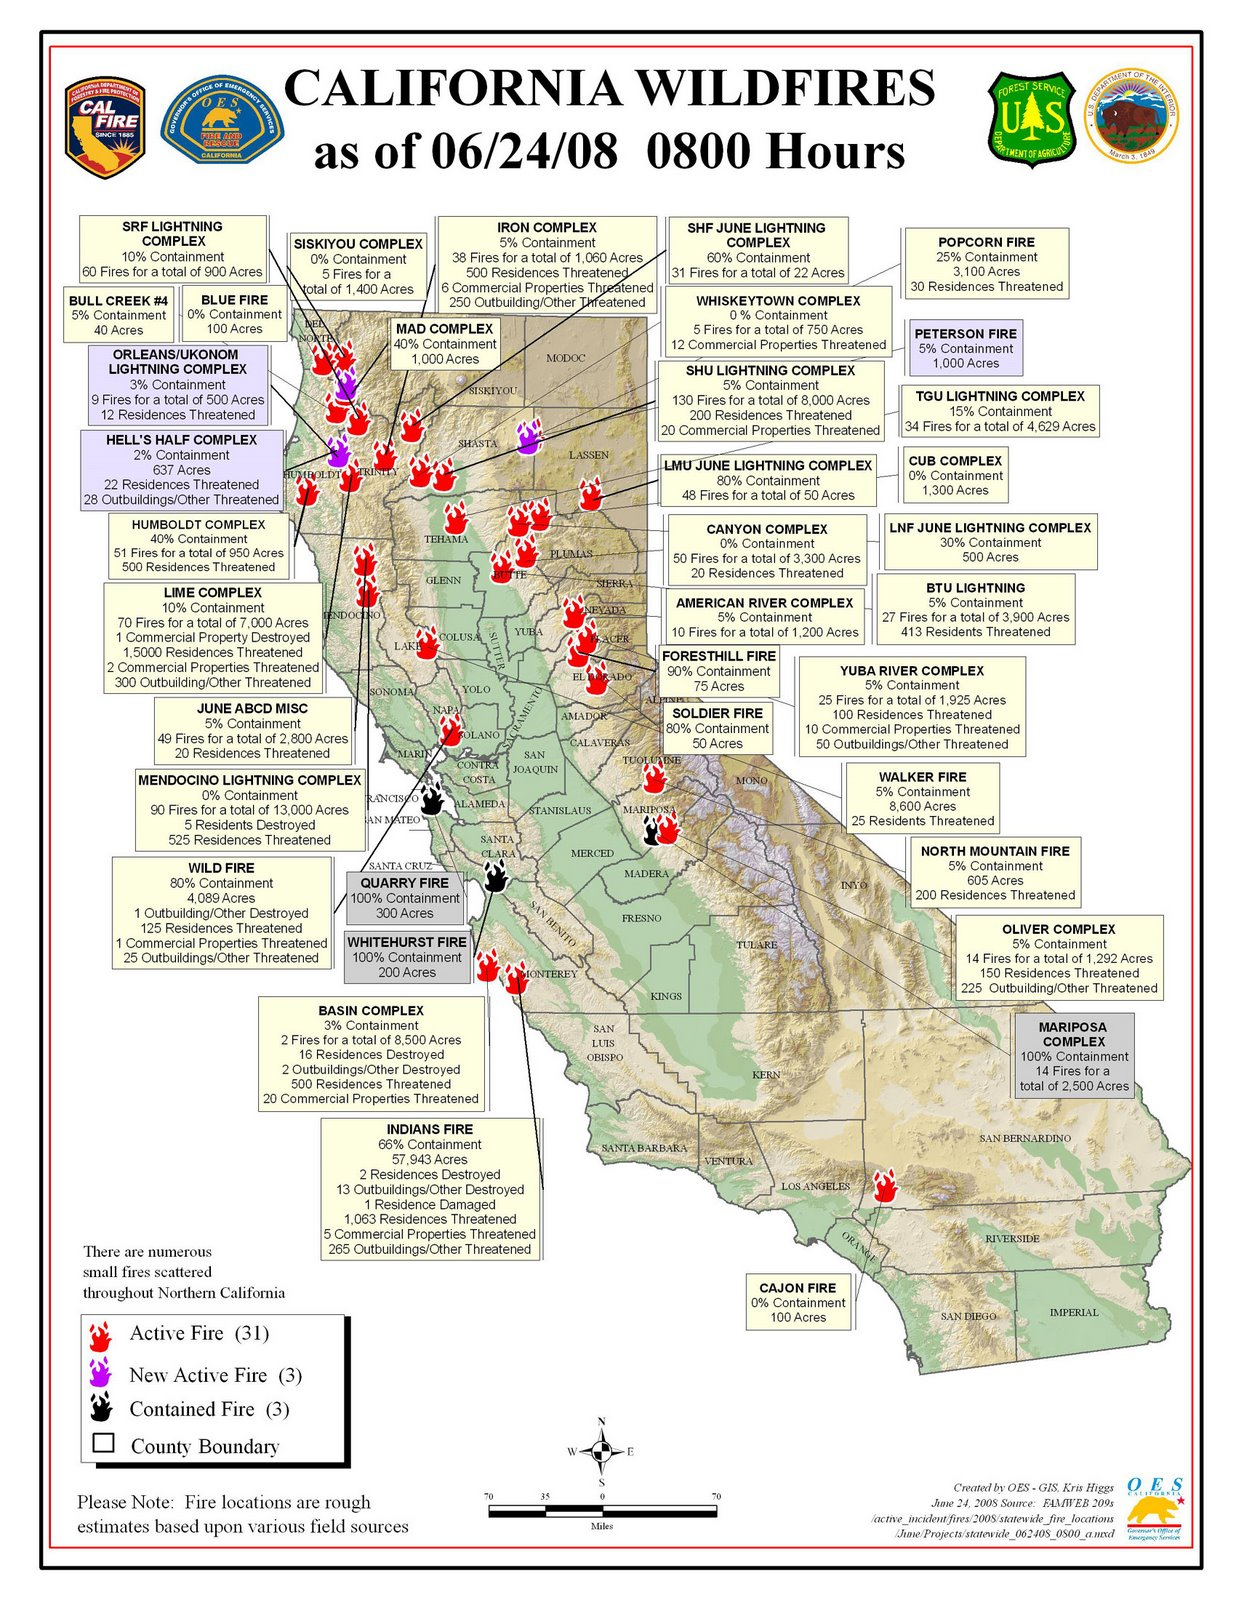 Firesam Road Maps Map Of The Fires In California - Klipy - Fires In California Right Now Map